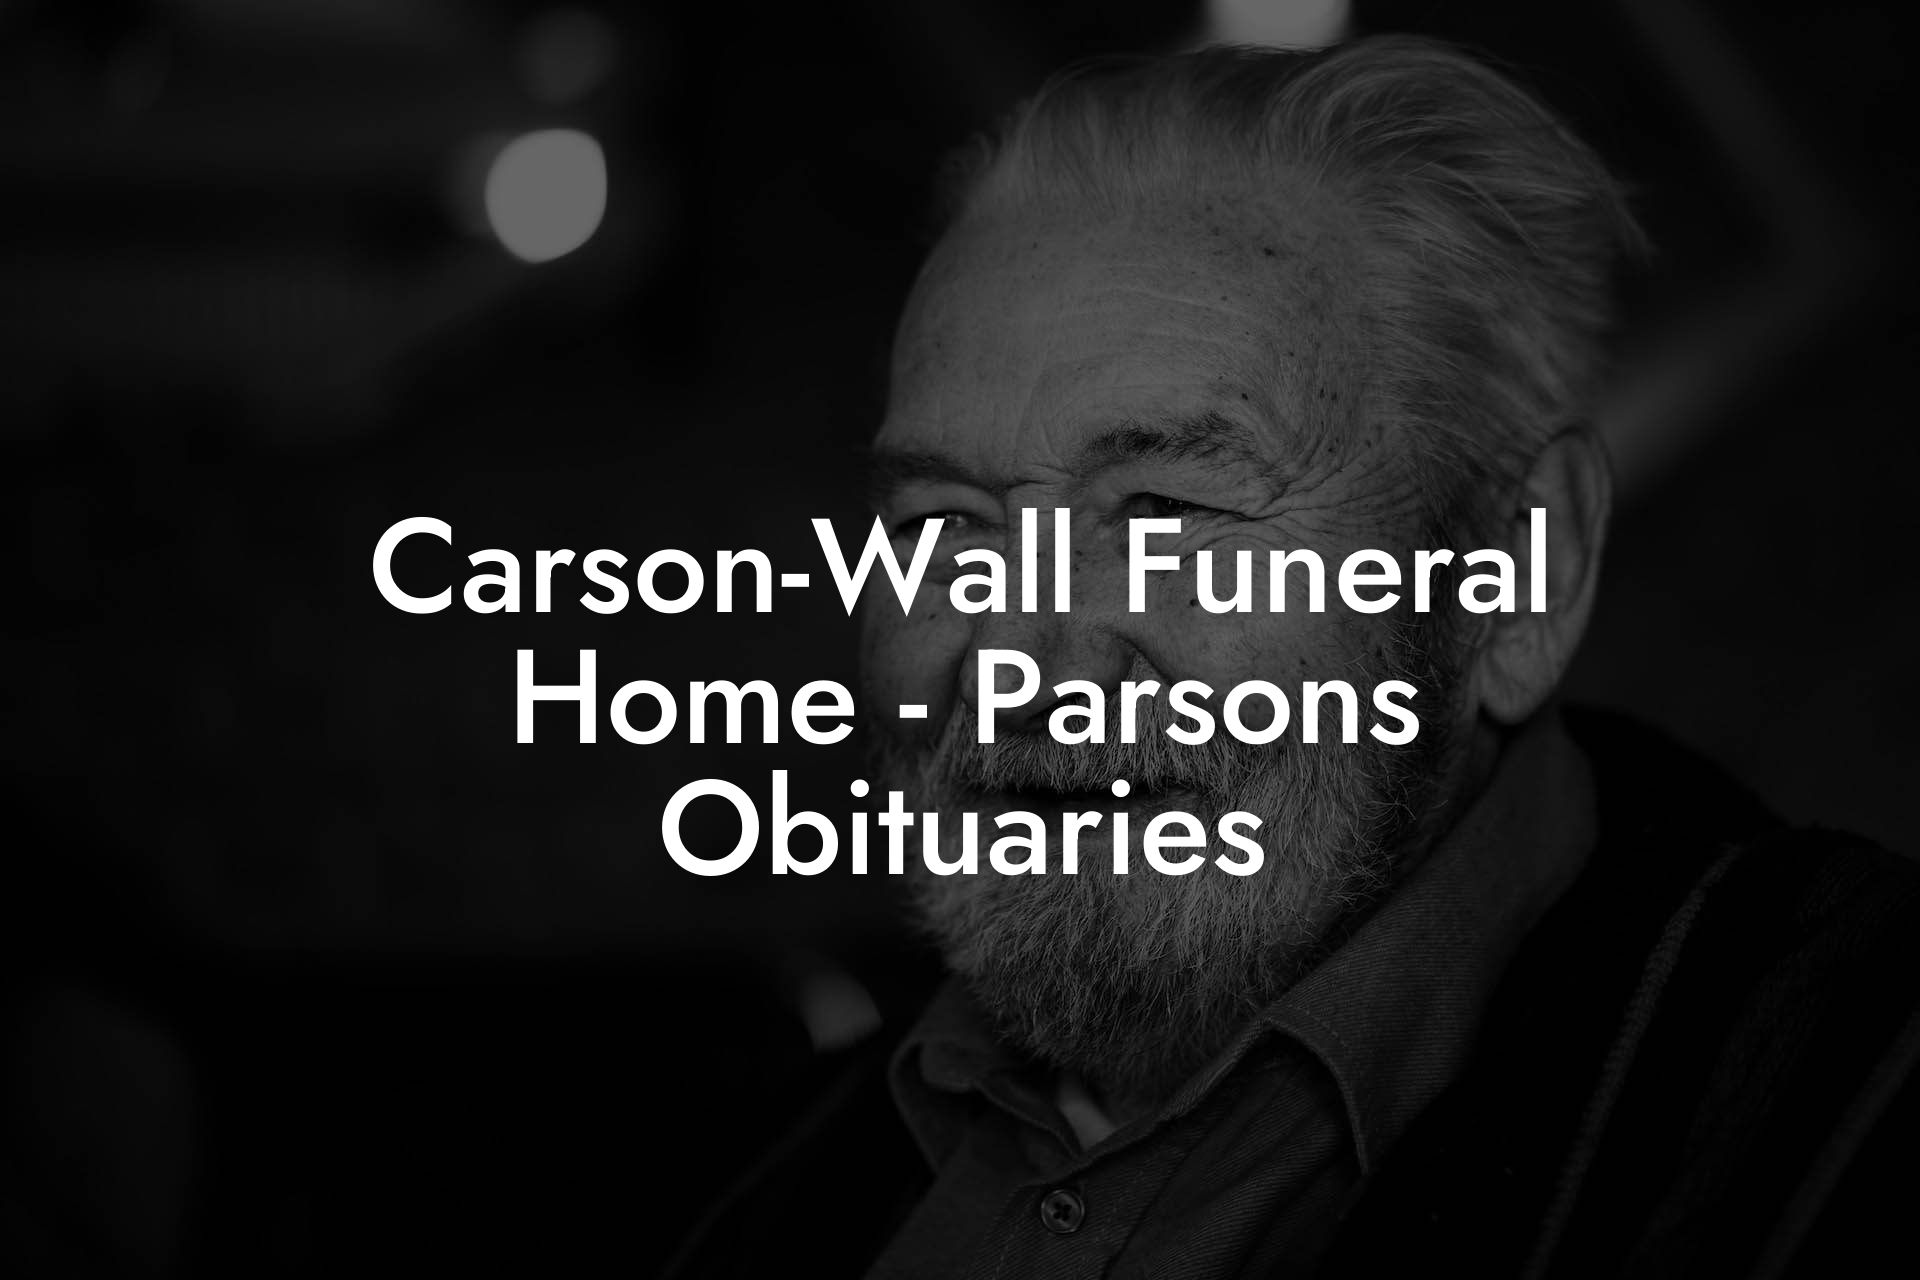 Carson-Wall Funeral Home - Parsons Obituaries